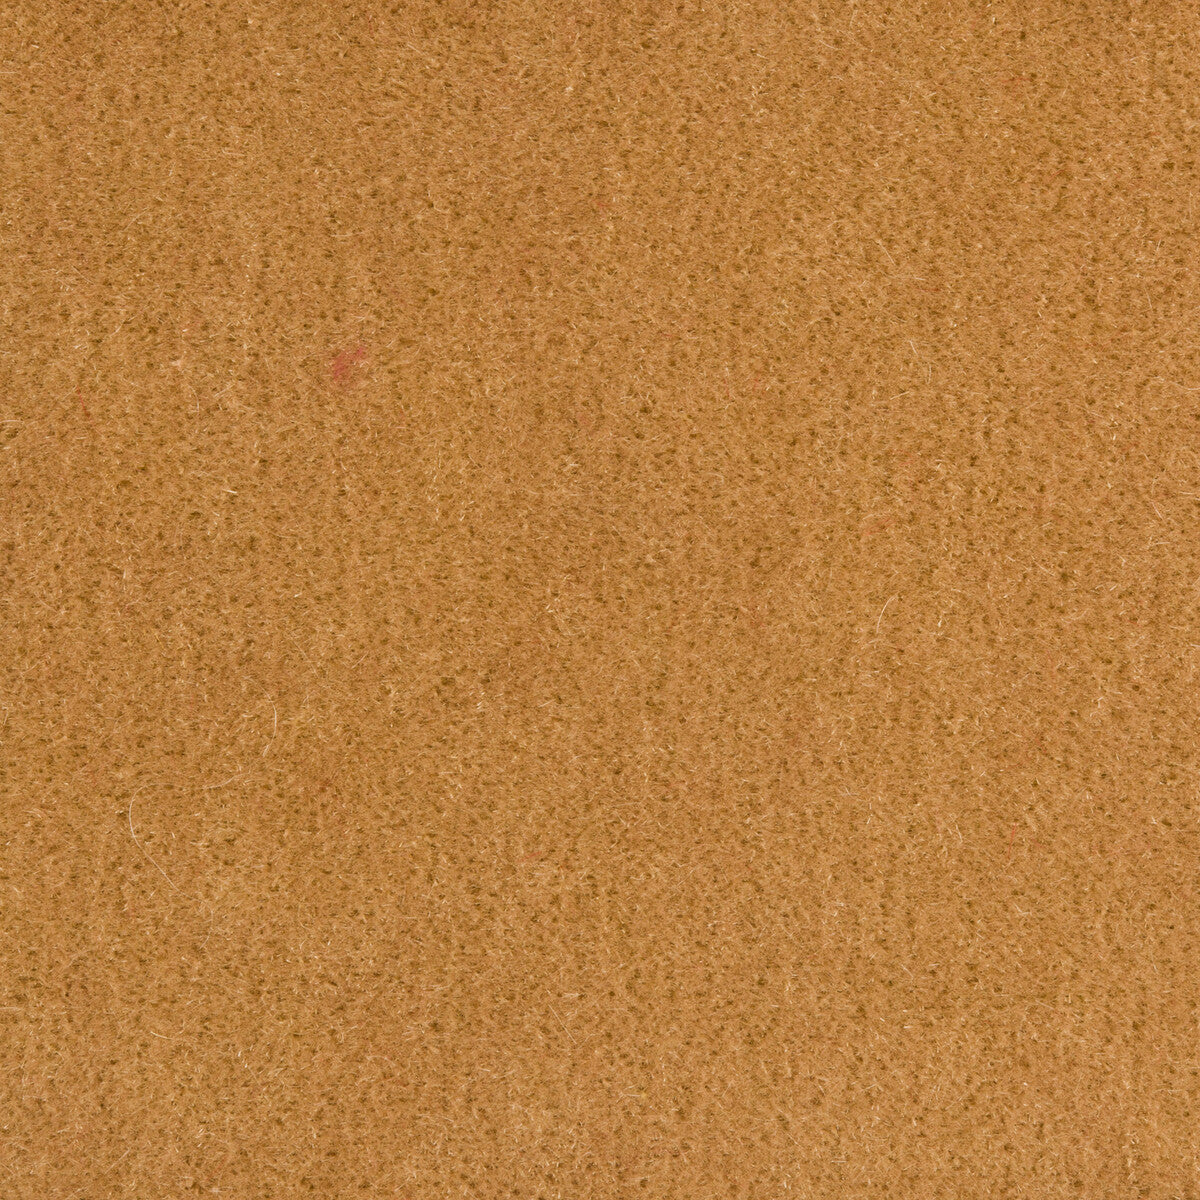 Bachelor Mohair fabric in wheat color - pattern 8014101.16.0 - by Brunschwig &amp; Fils